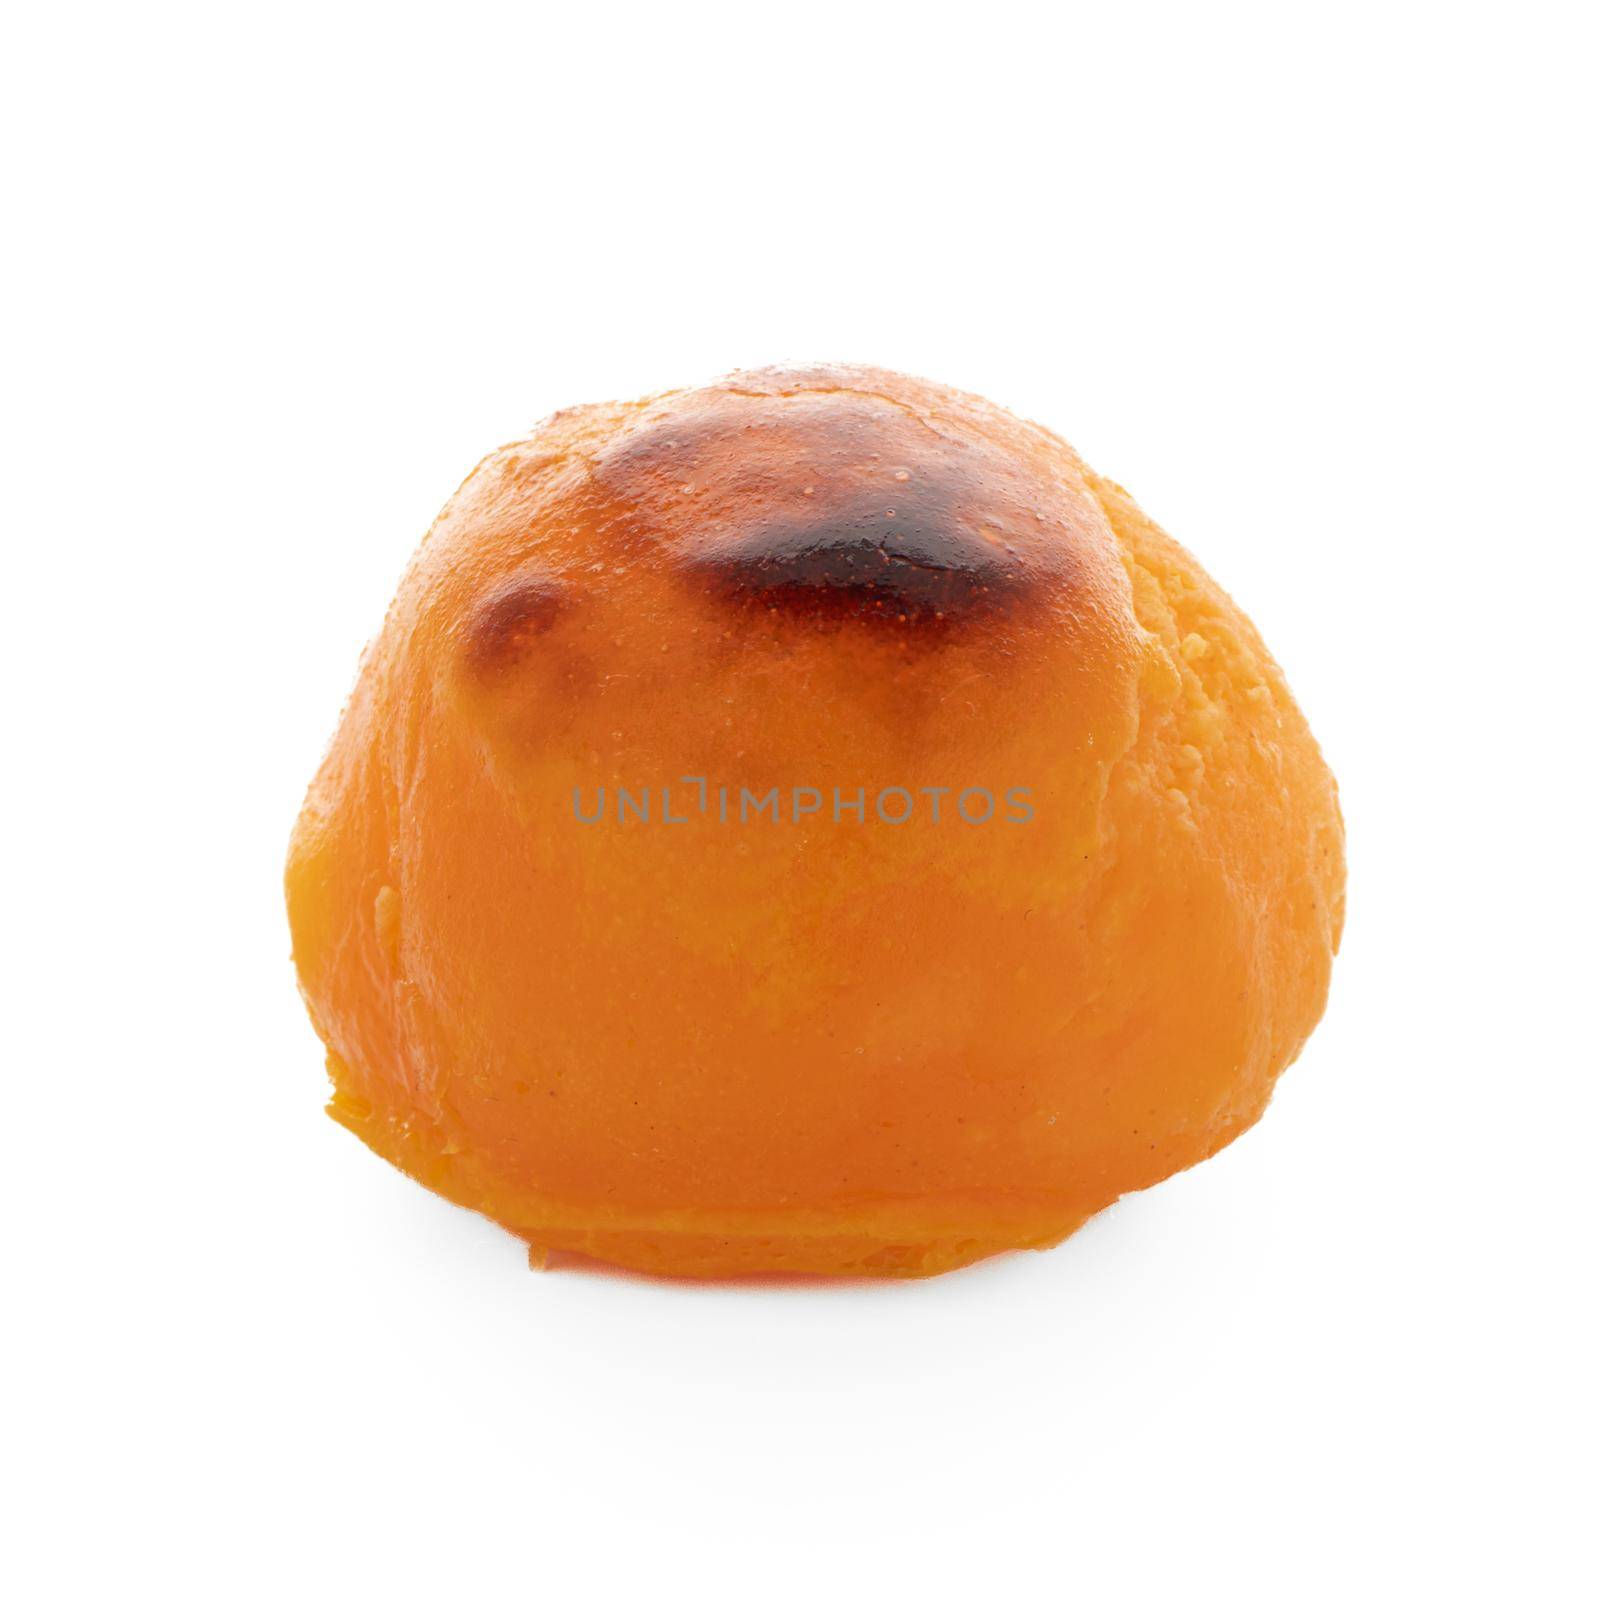 Traditional Portuguese conventual sweet called Castanha De Ovo from Alcobaca, Portugal. Isolated on white background.